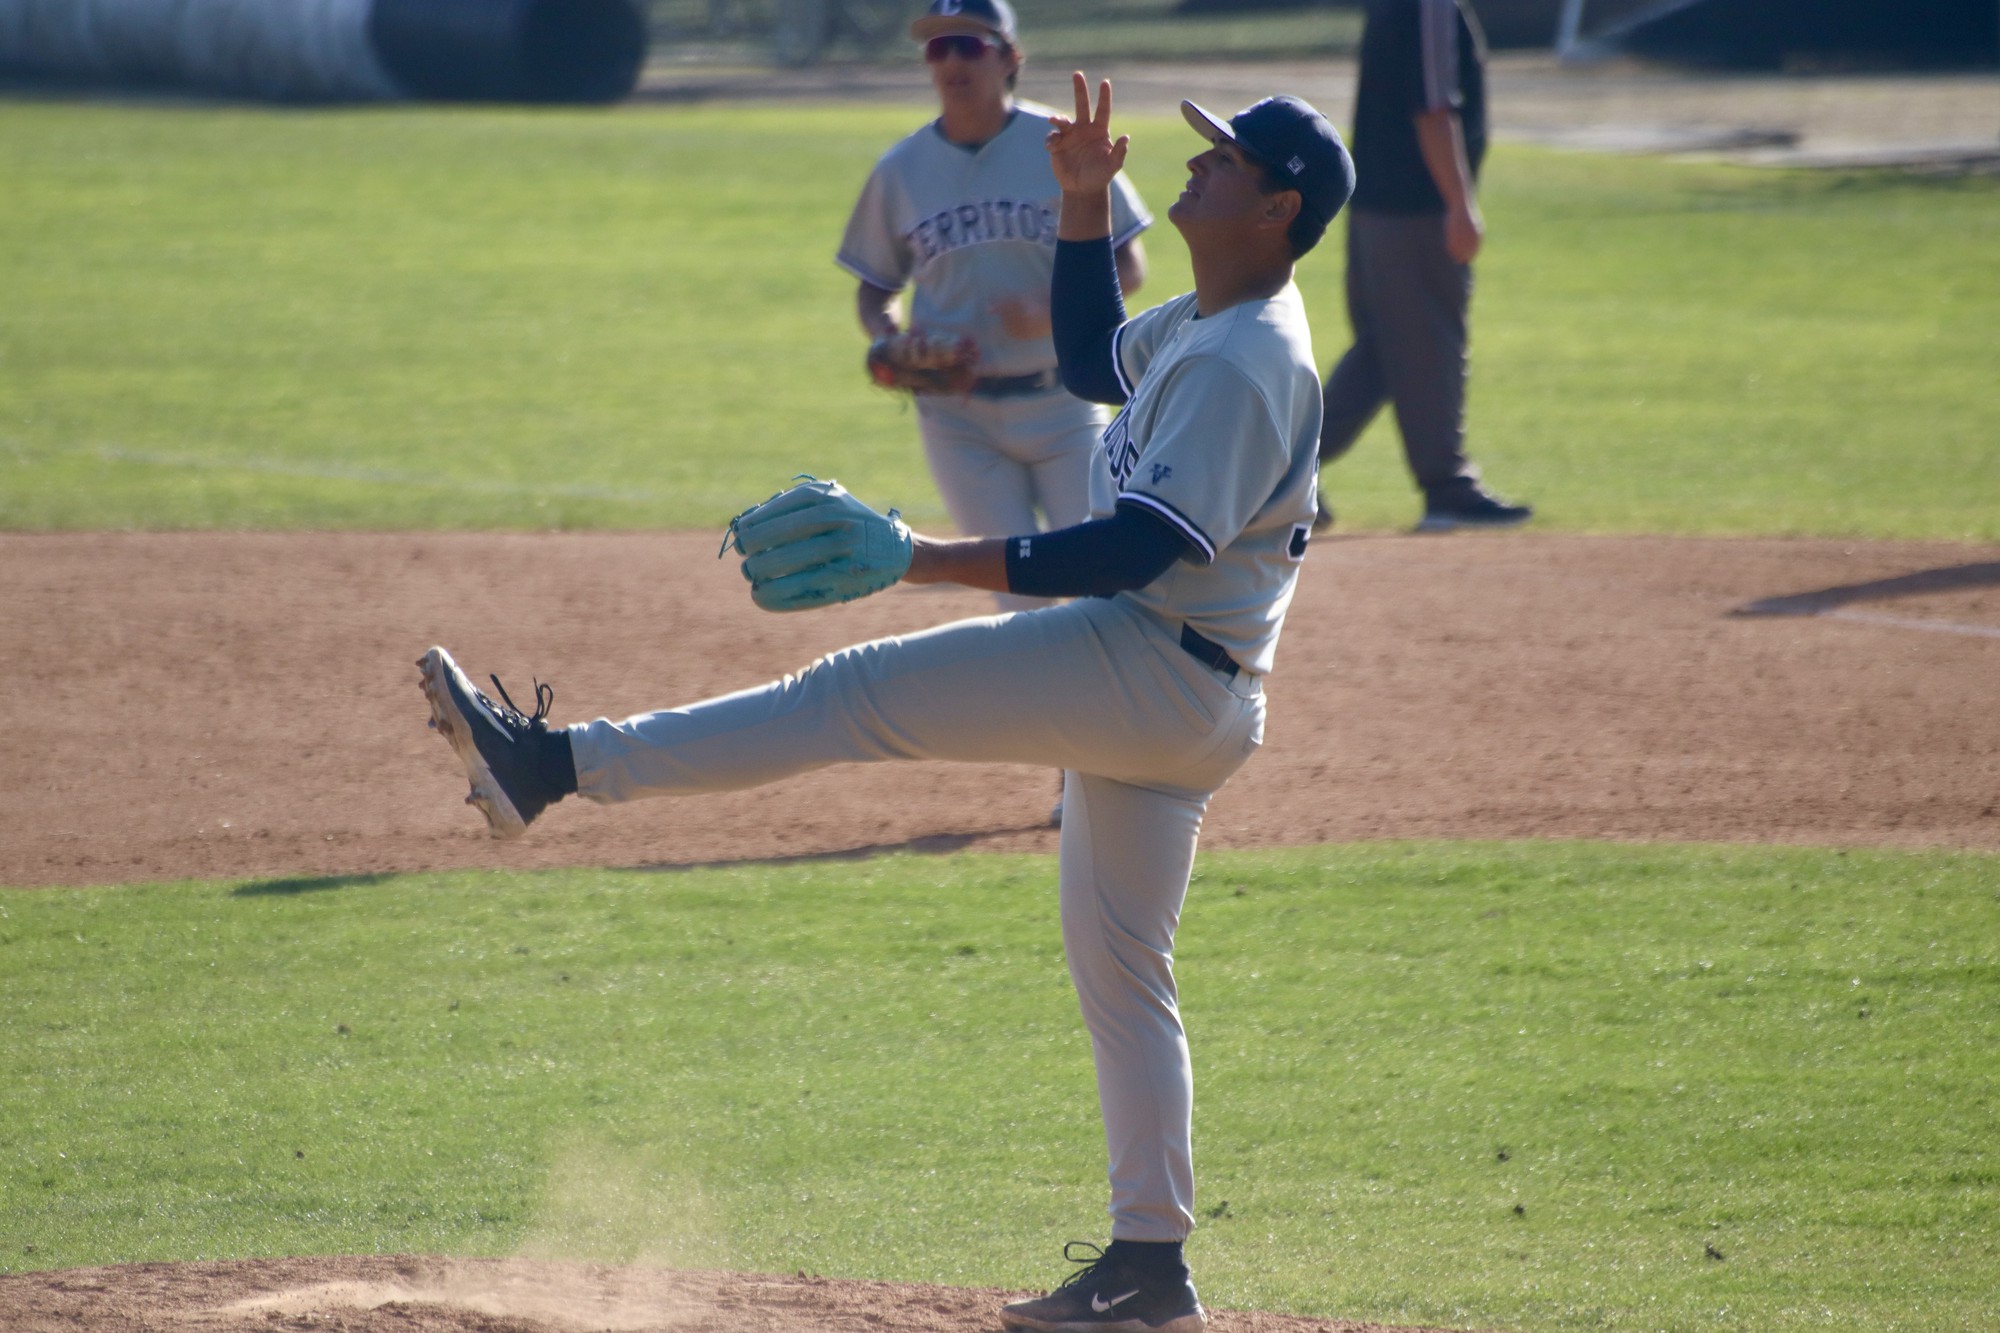 Pitcher, Franky Lopez, kicking his leg in the air and raising his arm after recording the final out to finish the complete game. 